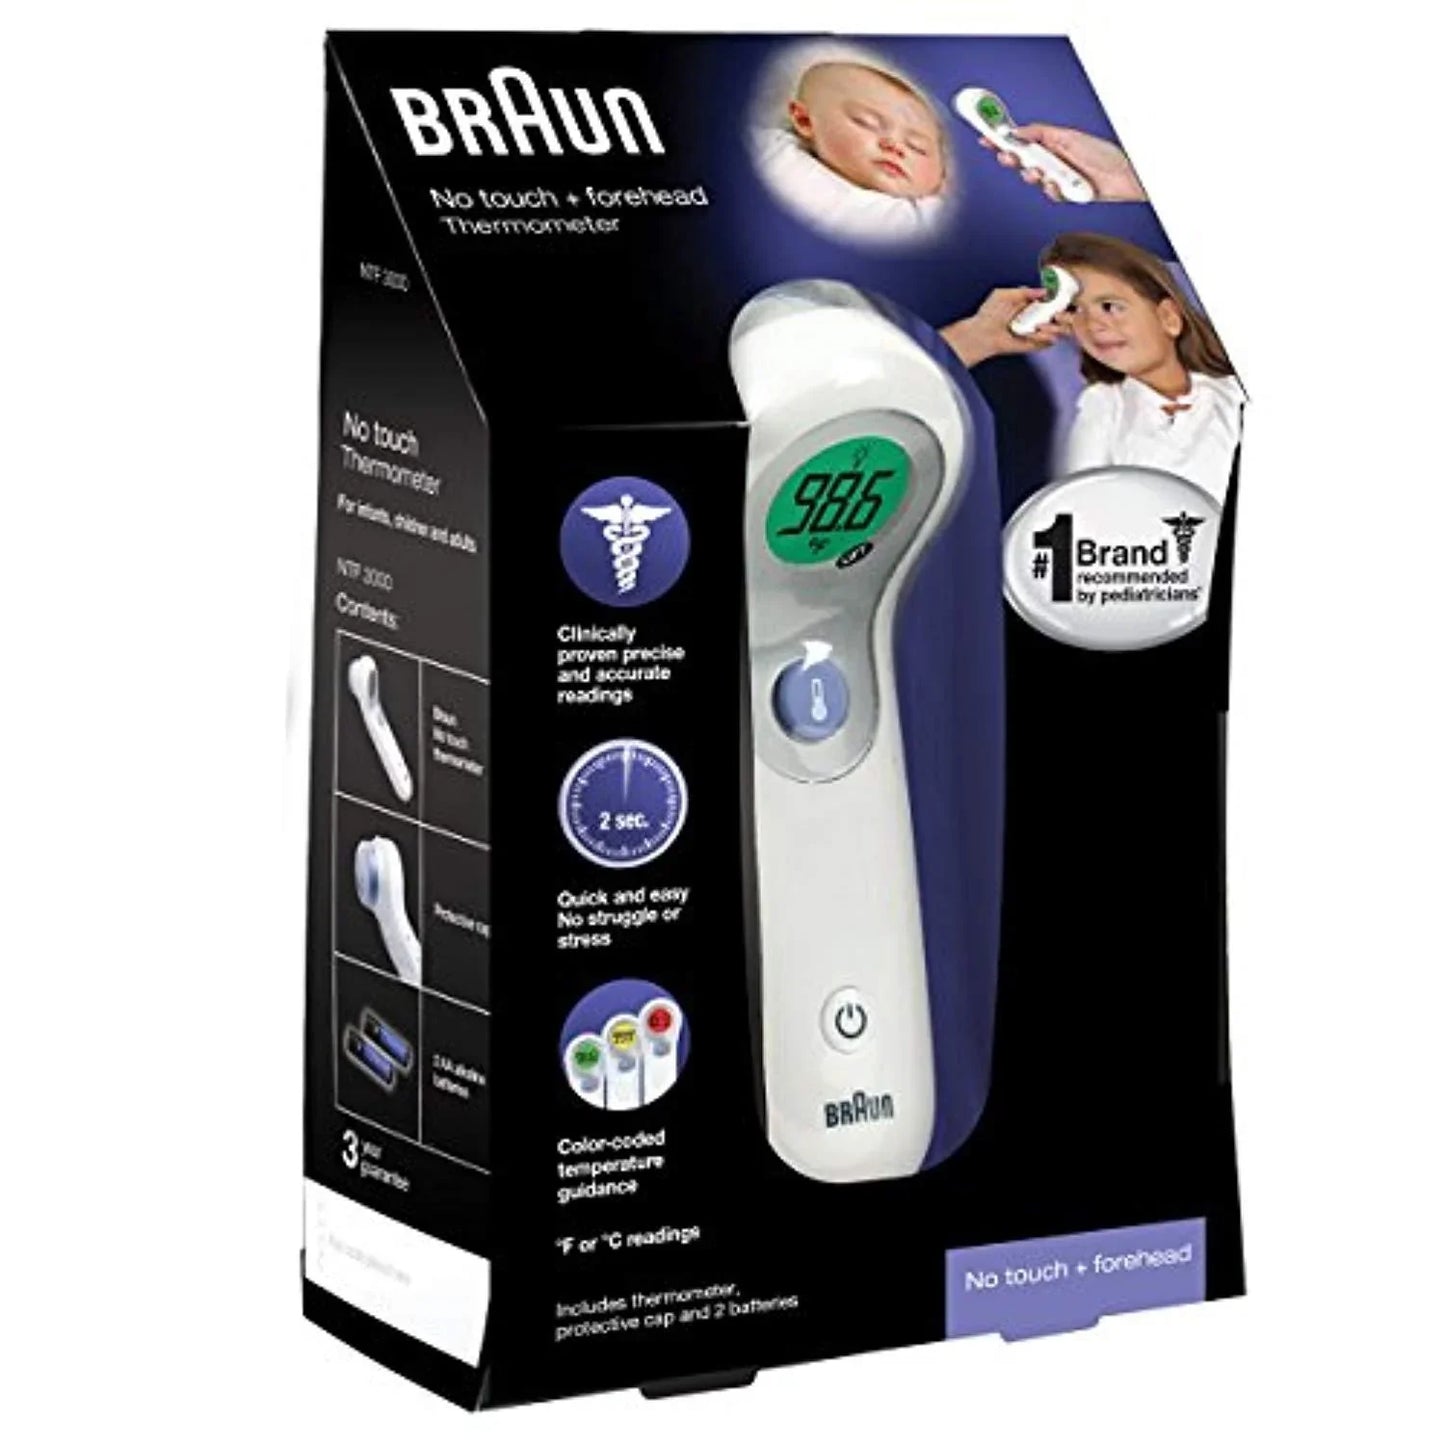 Braun NTF3000 - No Touch + Forehead Thermometer